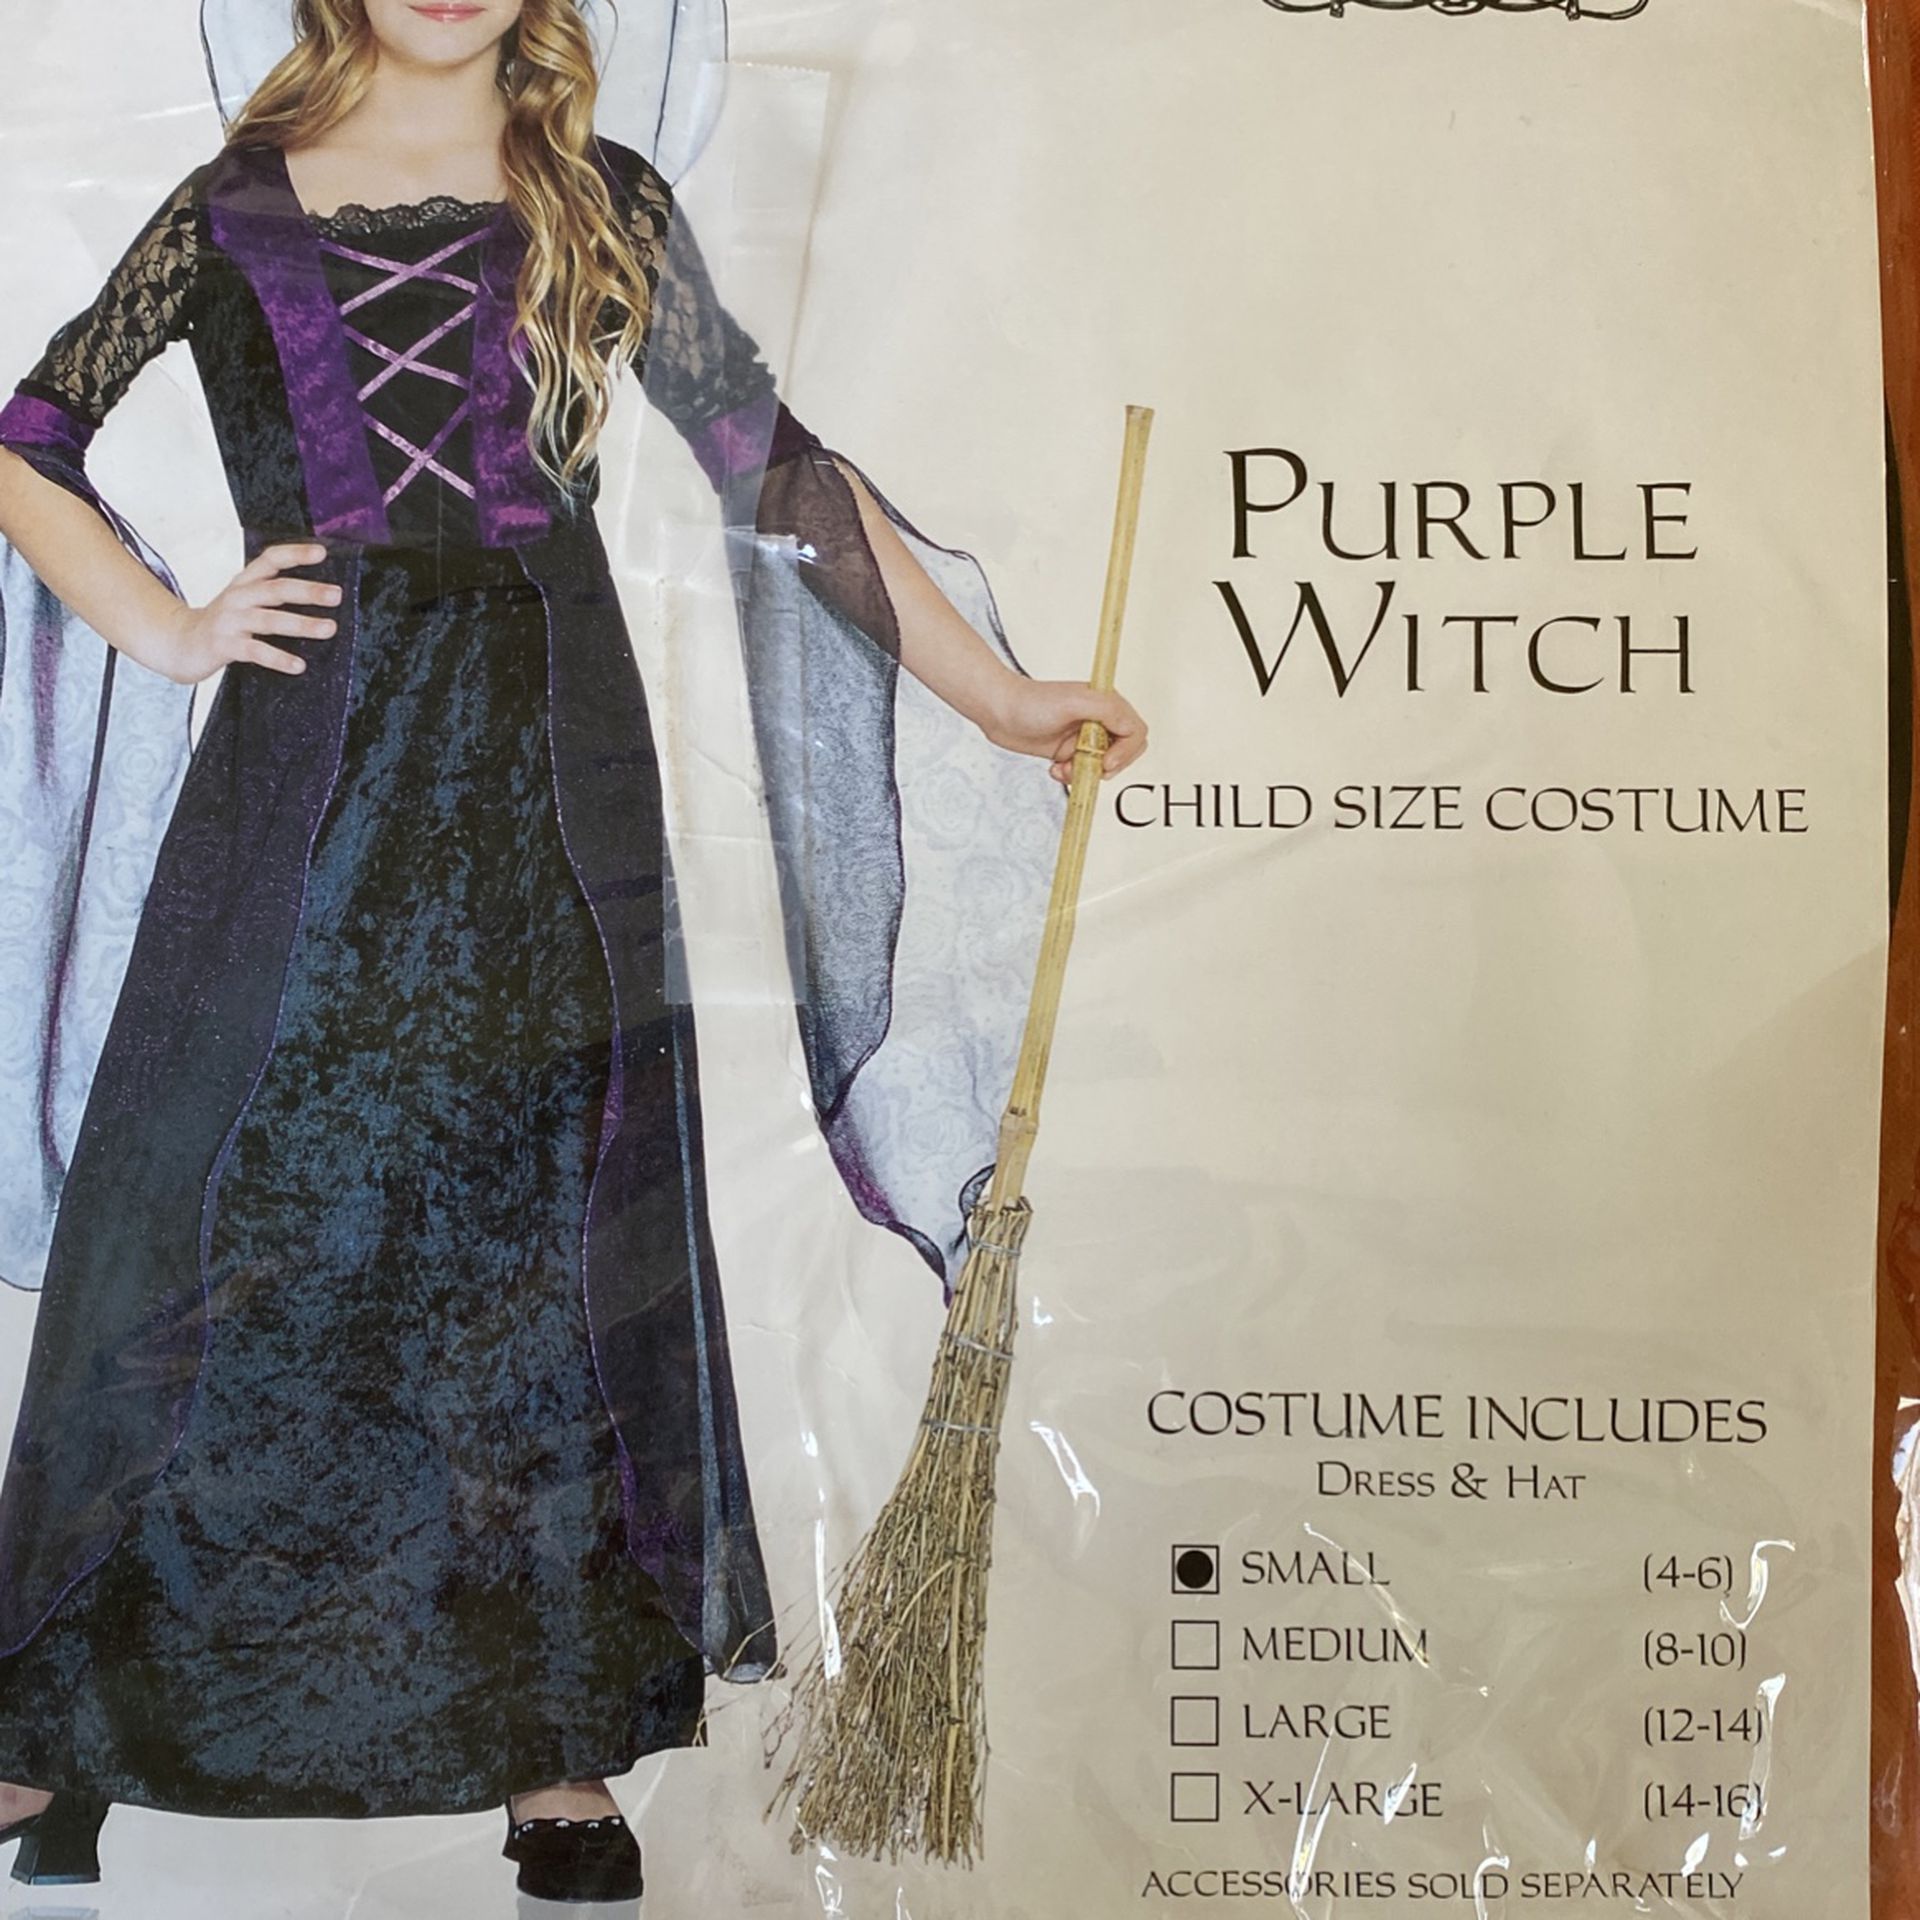 Girl Costume (Purple Witch) -4-6years Old